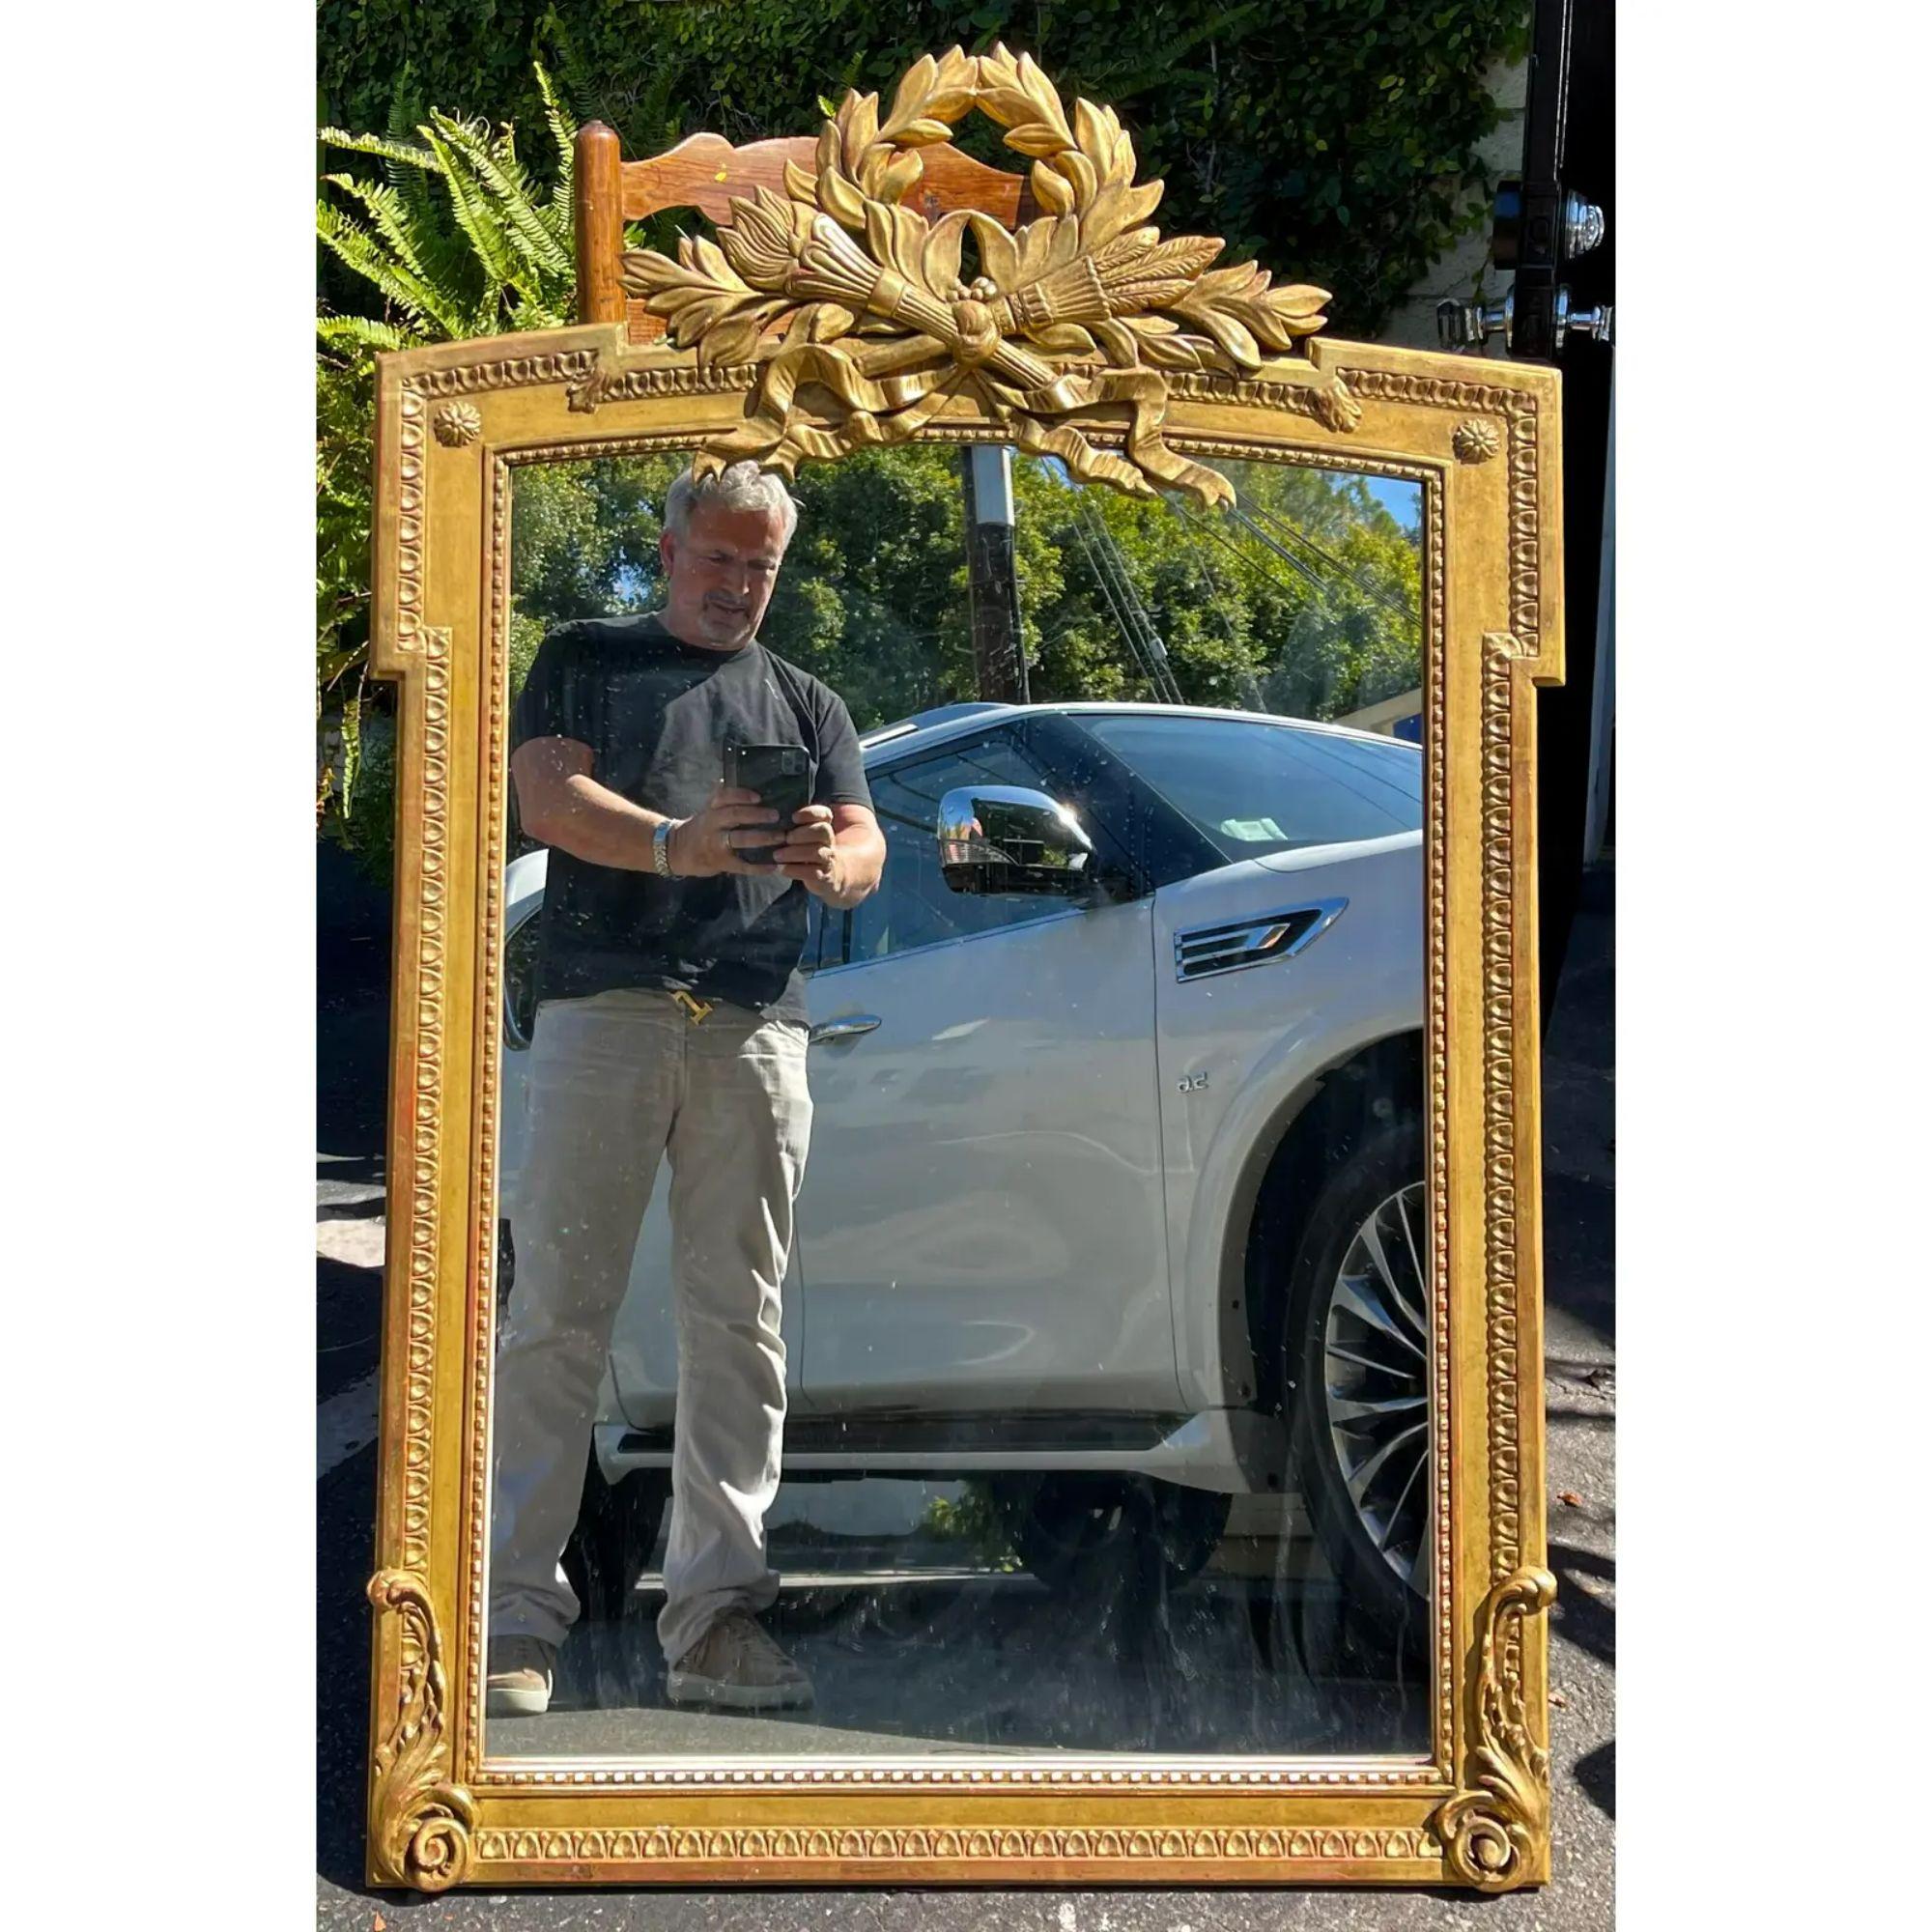 18th Century style Jerry Solomon Neoclassical giltwood mirror.

Additional information:
Materials: giltwood, mirror
Color: Gold
Period: 2000 - 2009
Styles: Neoclassical 
Item Type: vintage, antique or pre-owned
Dimensions: 32